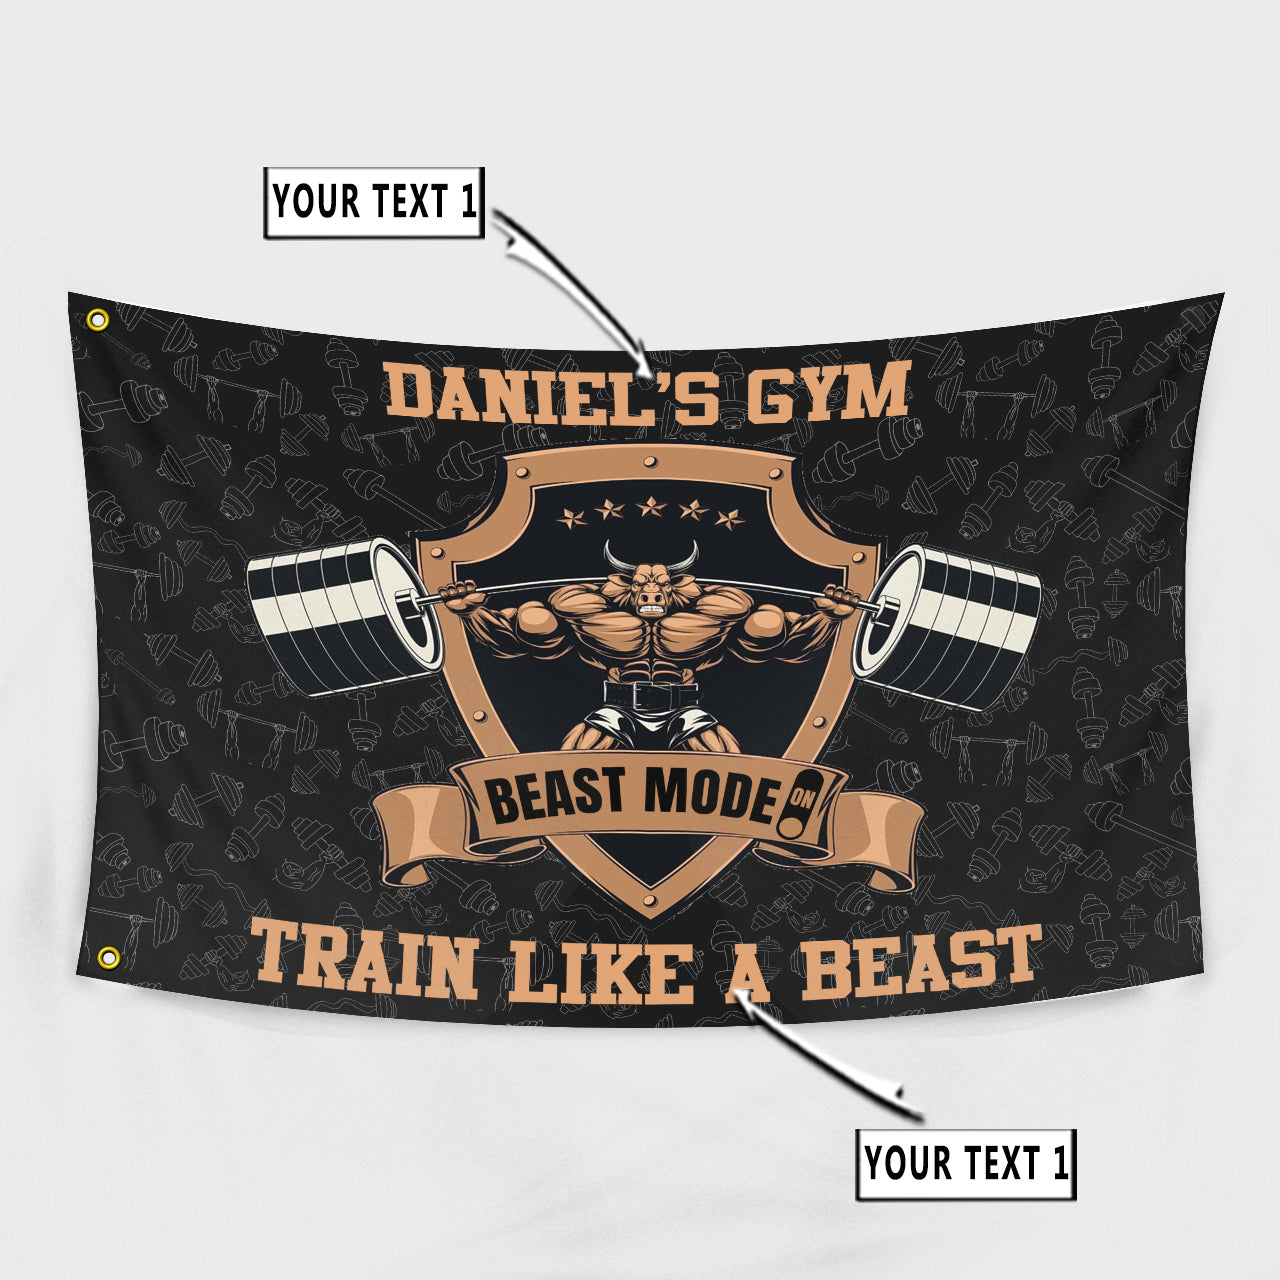 Personalized Bodybuilding Banner Flag Home Gym Decor Gym Gift Train Like A Beast Wall Art